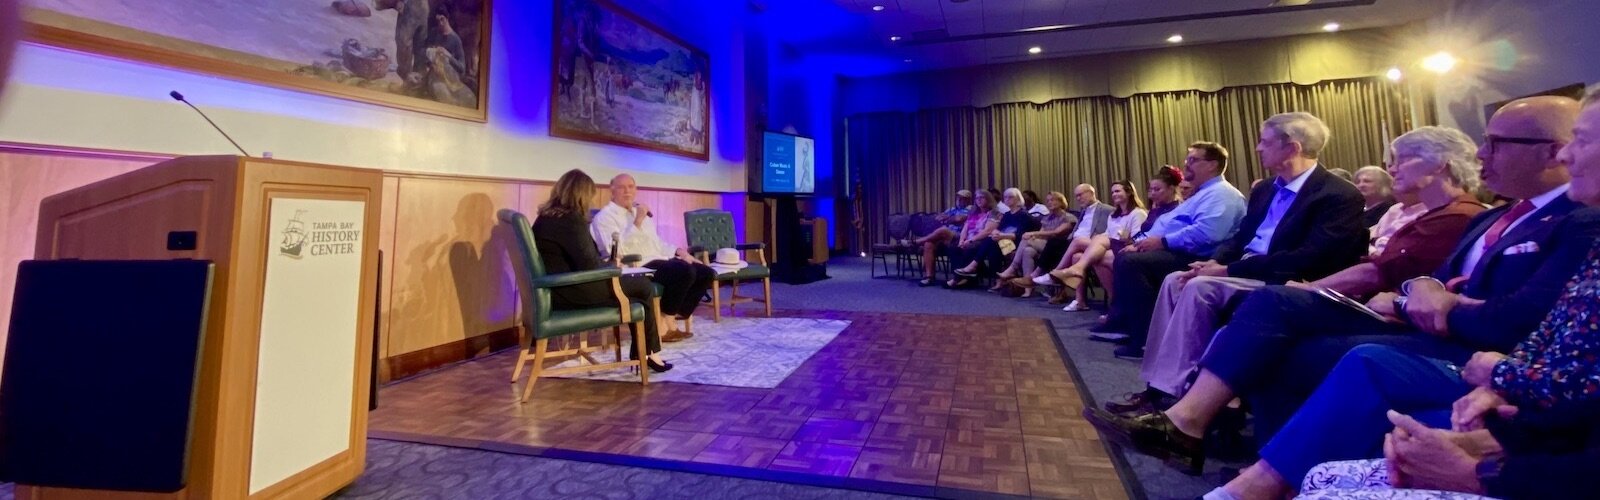 Tampa Community Leader Maruchi Azorin interviews Restaurateur and Philanthropist Richard Gonzmart during a November 2nd Florida Conversation: Cuban Music and Dance at the Tampa Bay History Center.